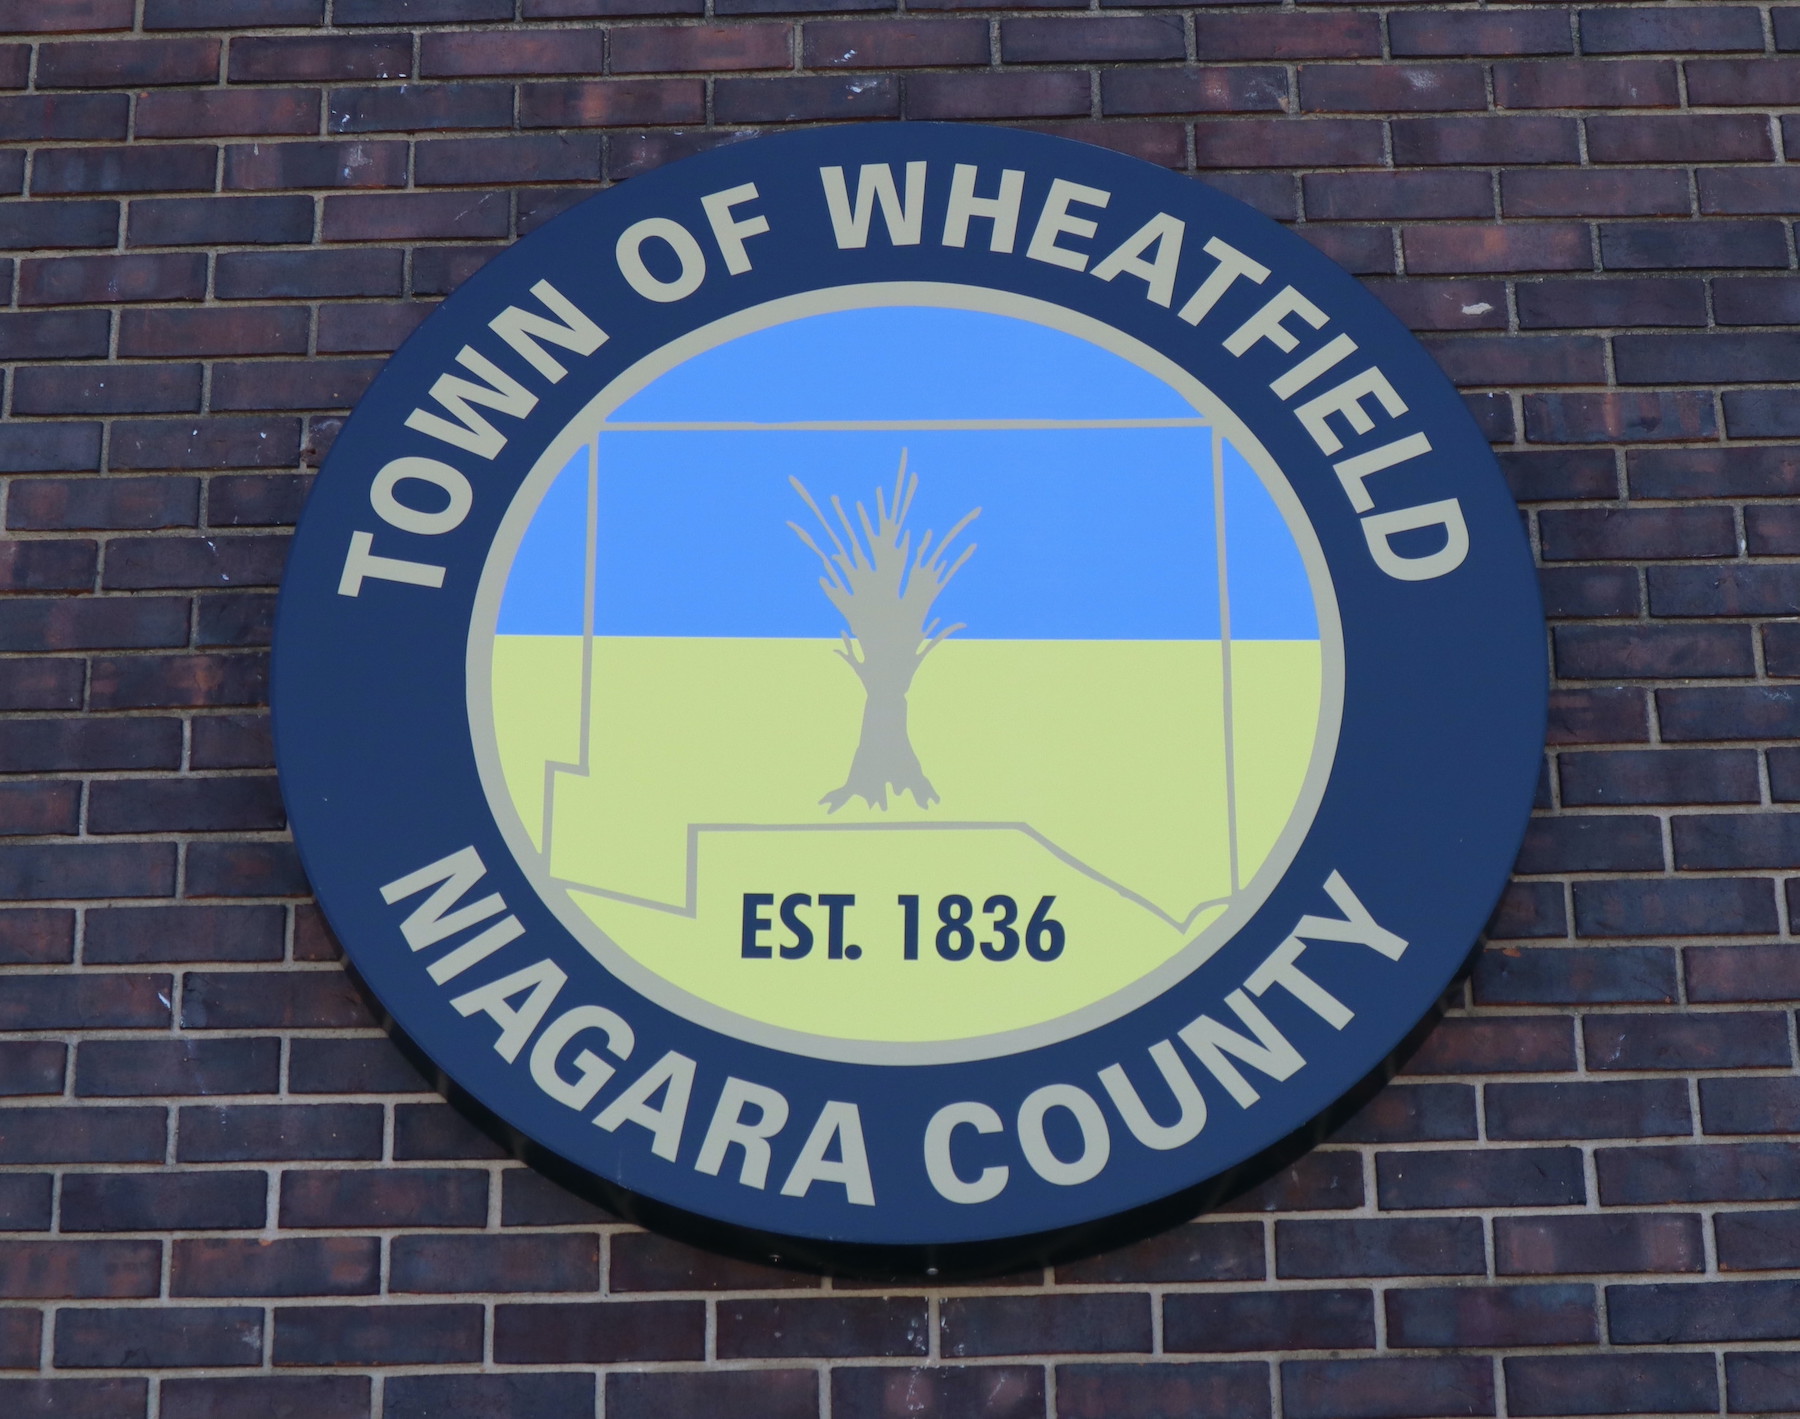 The Town of Wheatfield